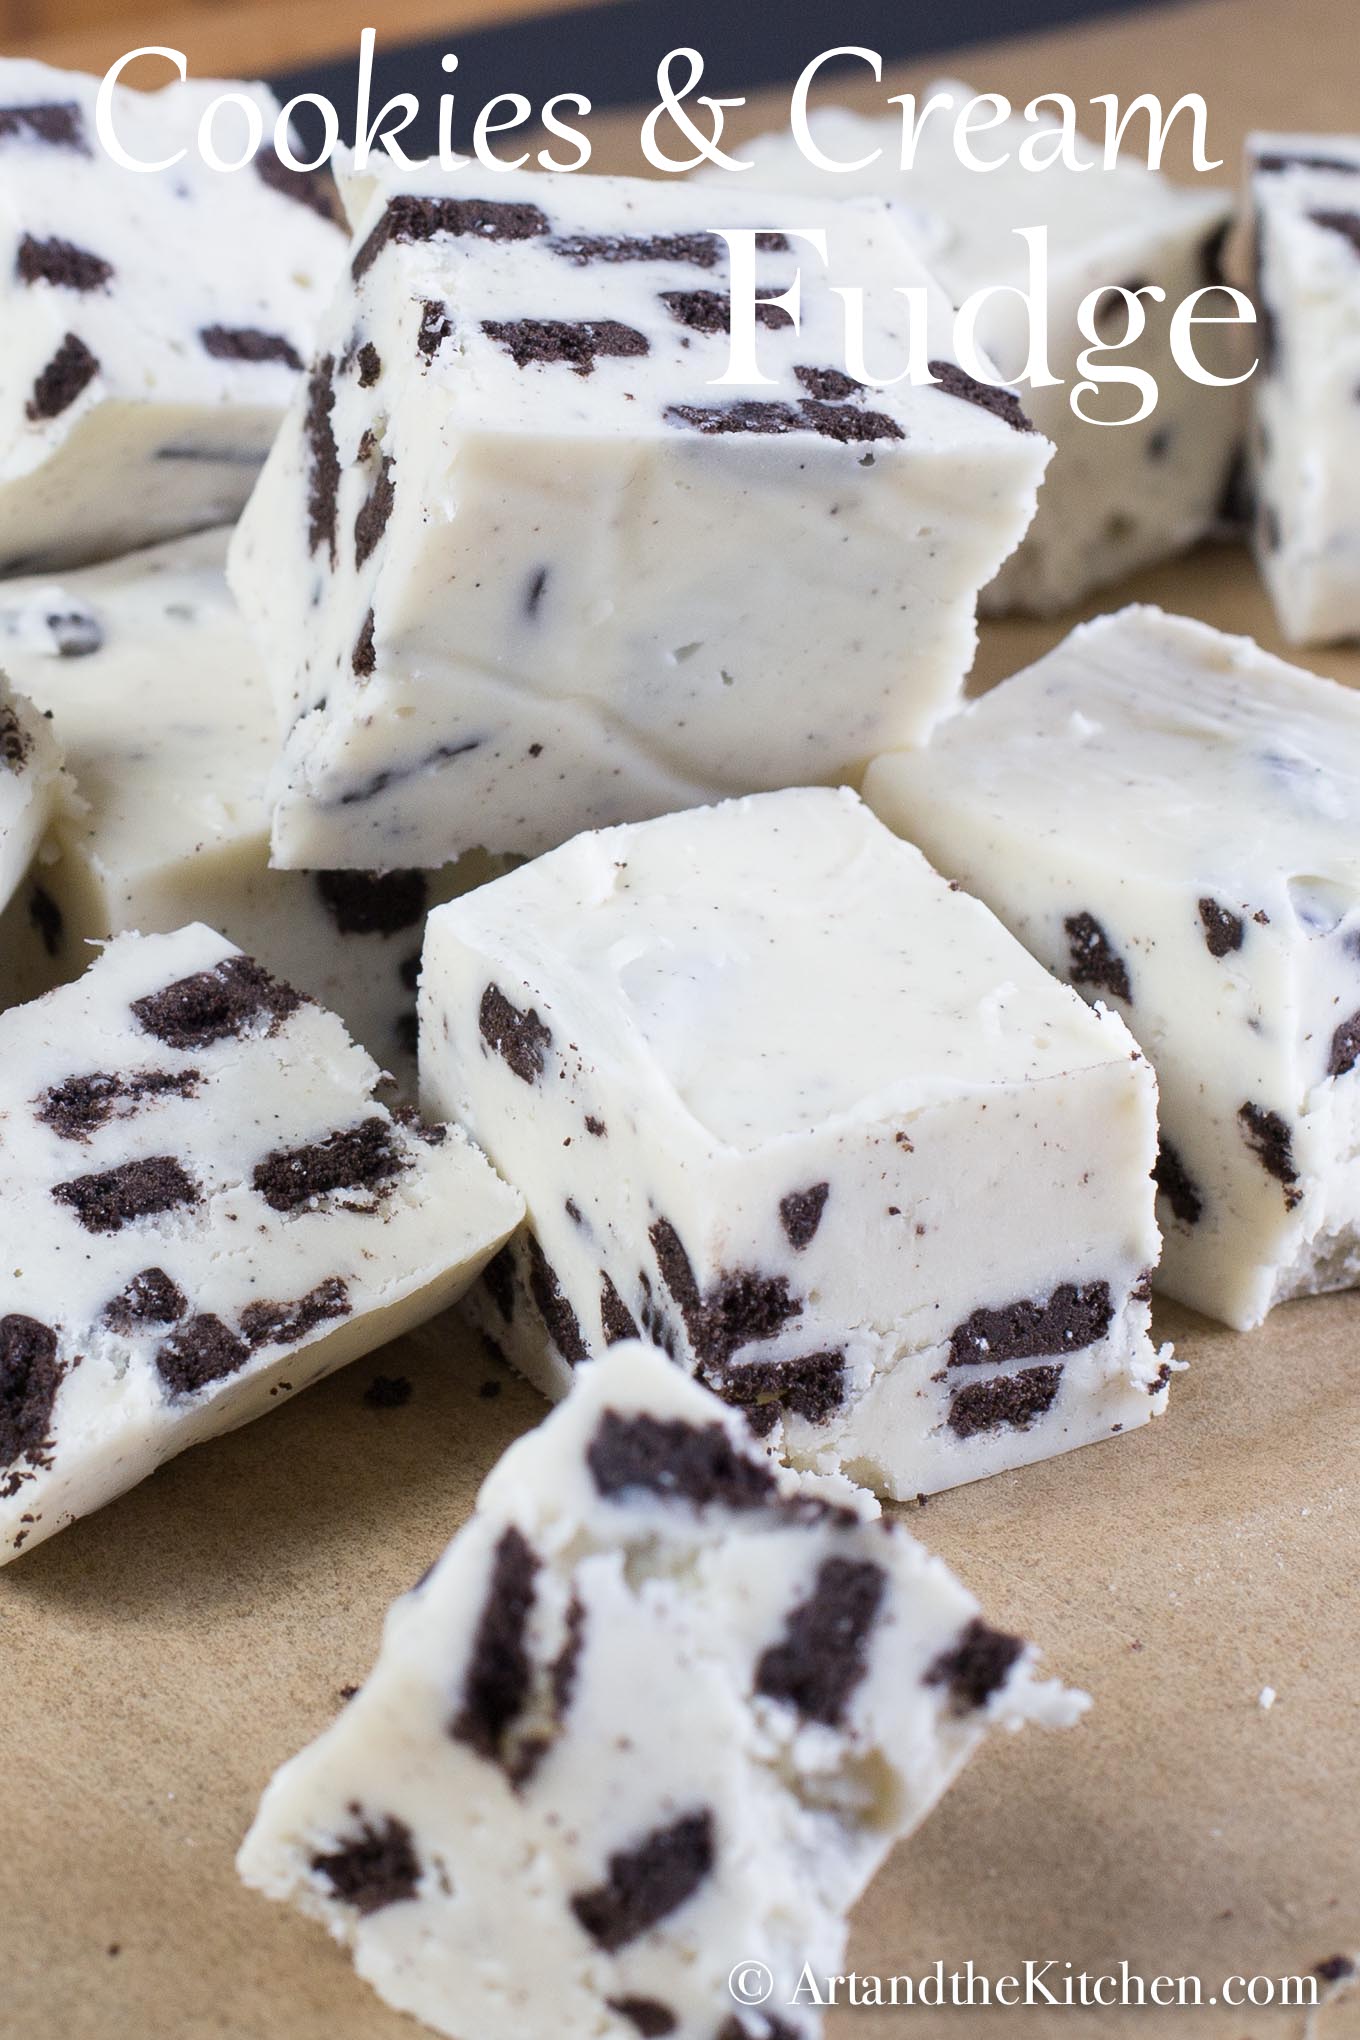 Fudge that is so smooth and creamy made with white chocolate and delicious bits of Oreo cookies. A Holiday favorite fudge recipe! via @artandthekitch